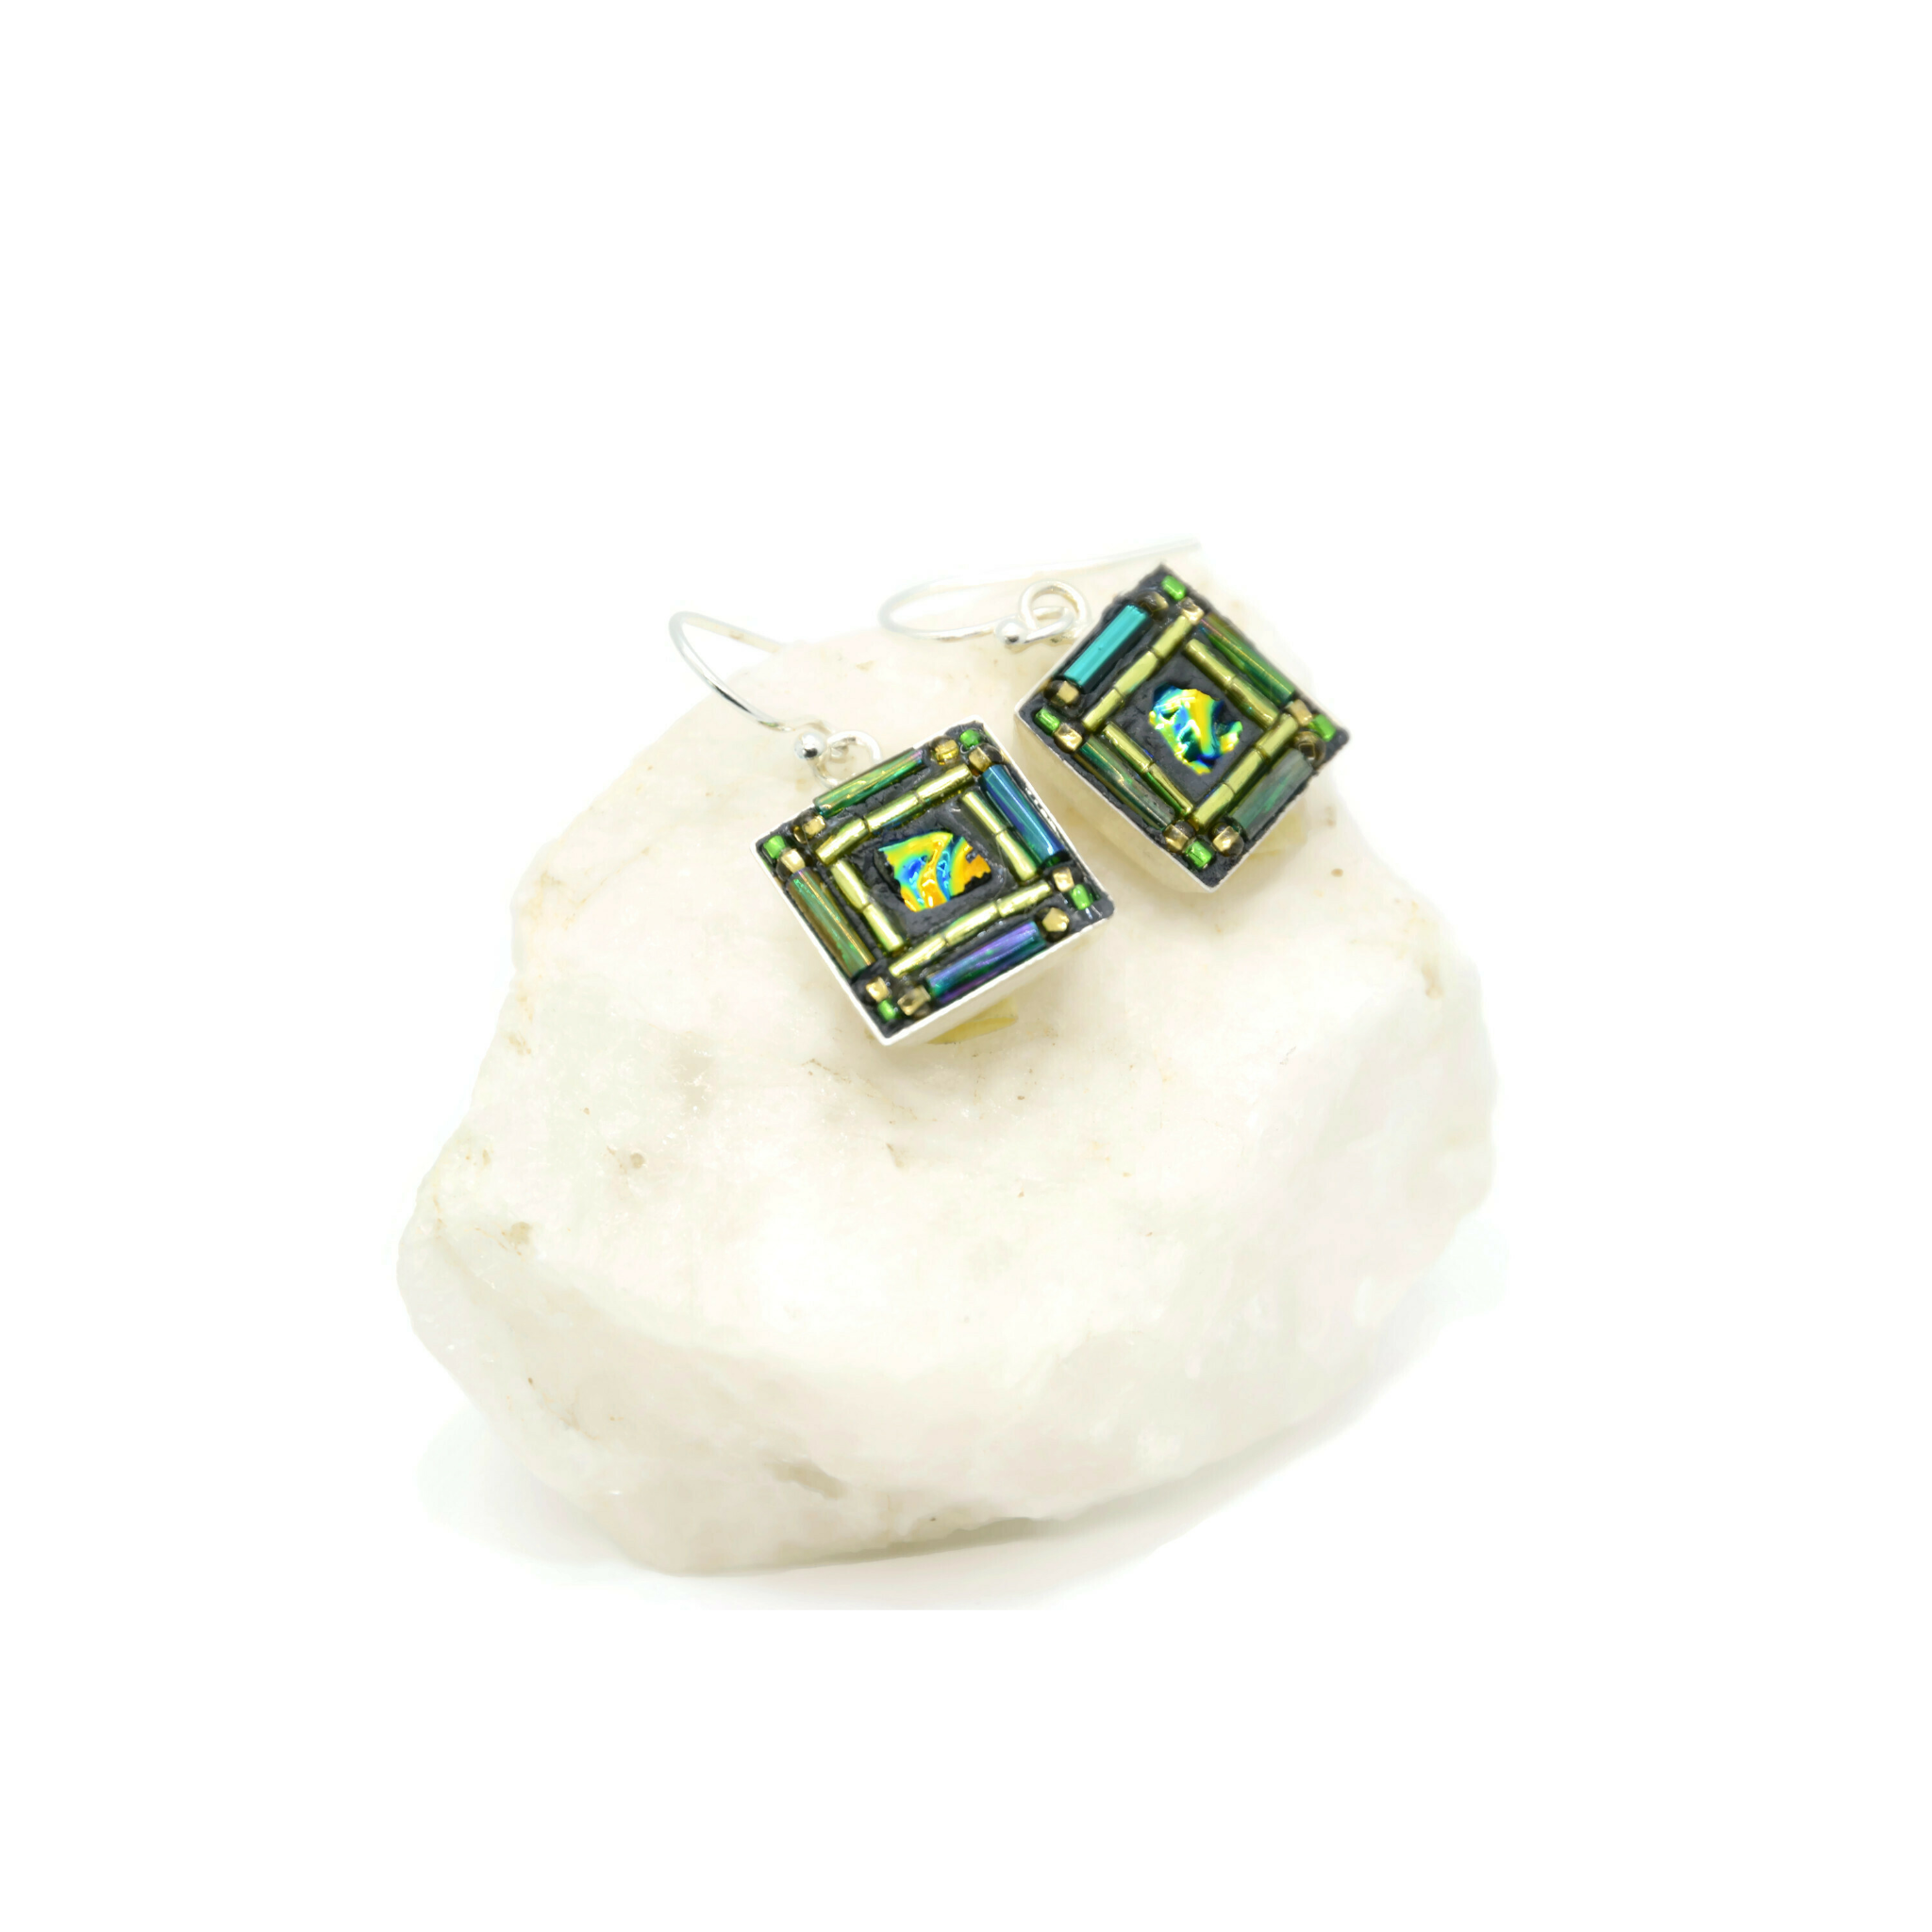 Green and Turquoise Square Bling Earrings